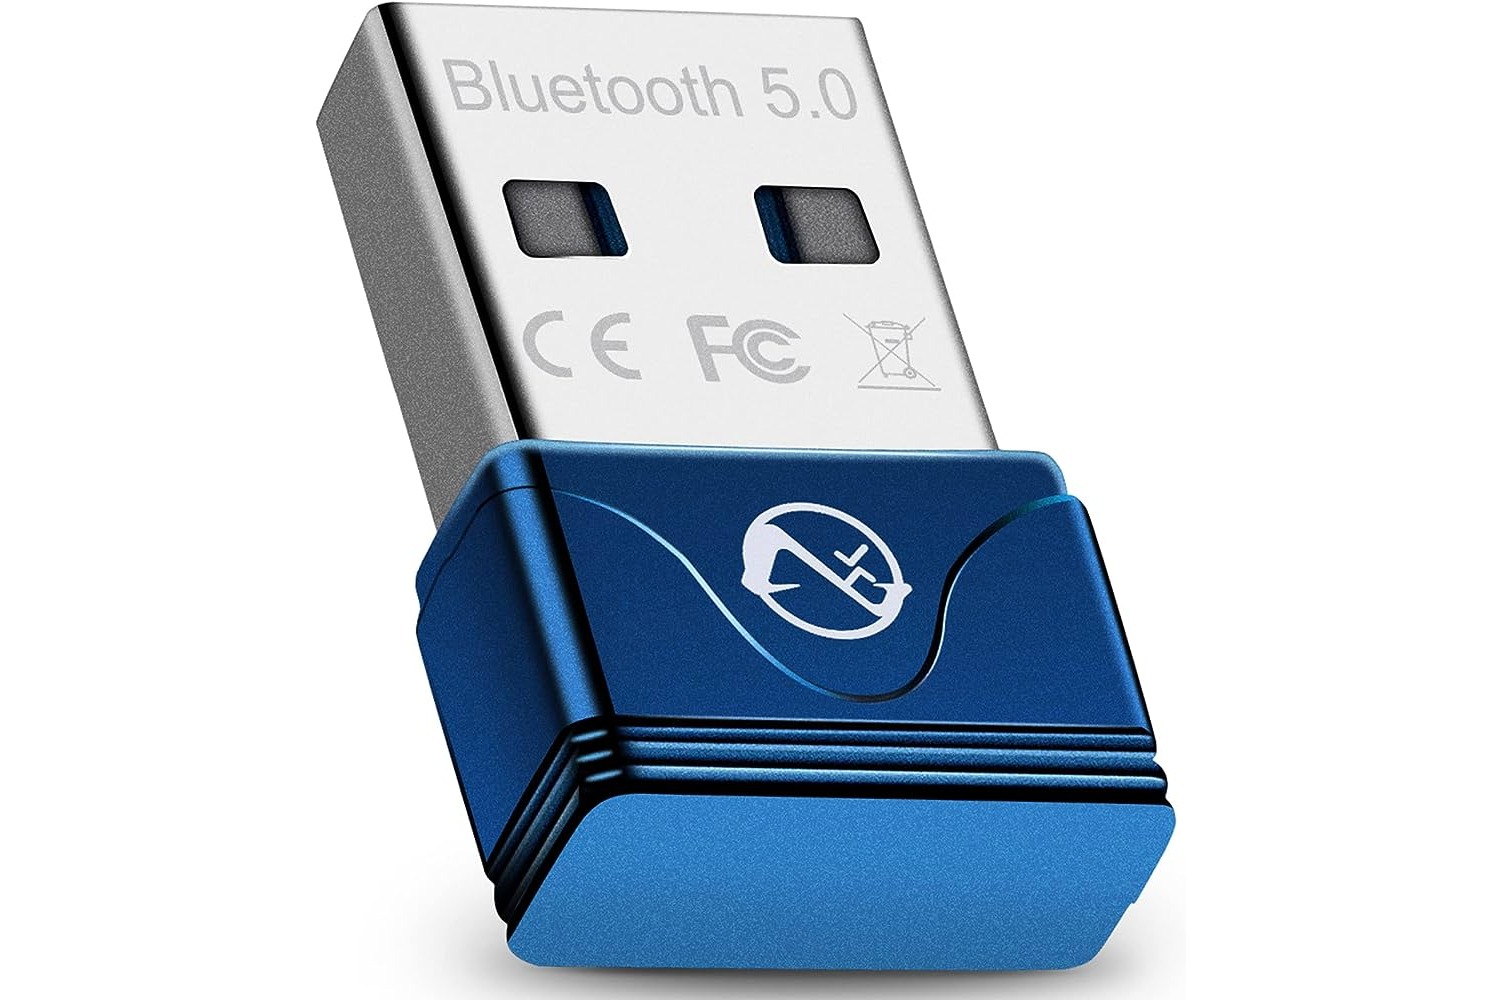 where-can-i-buy-true-blue-dongle